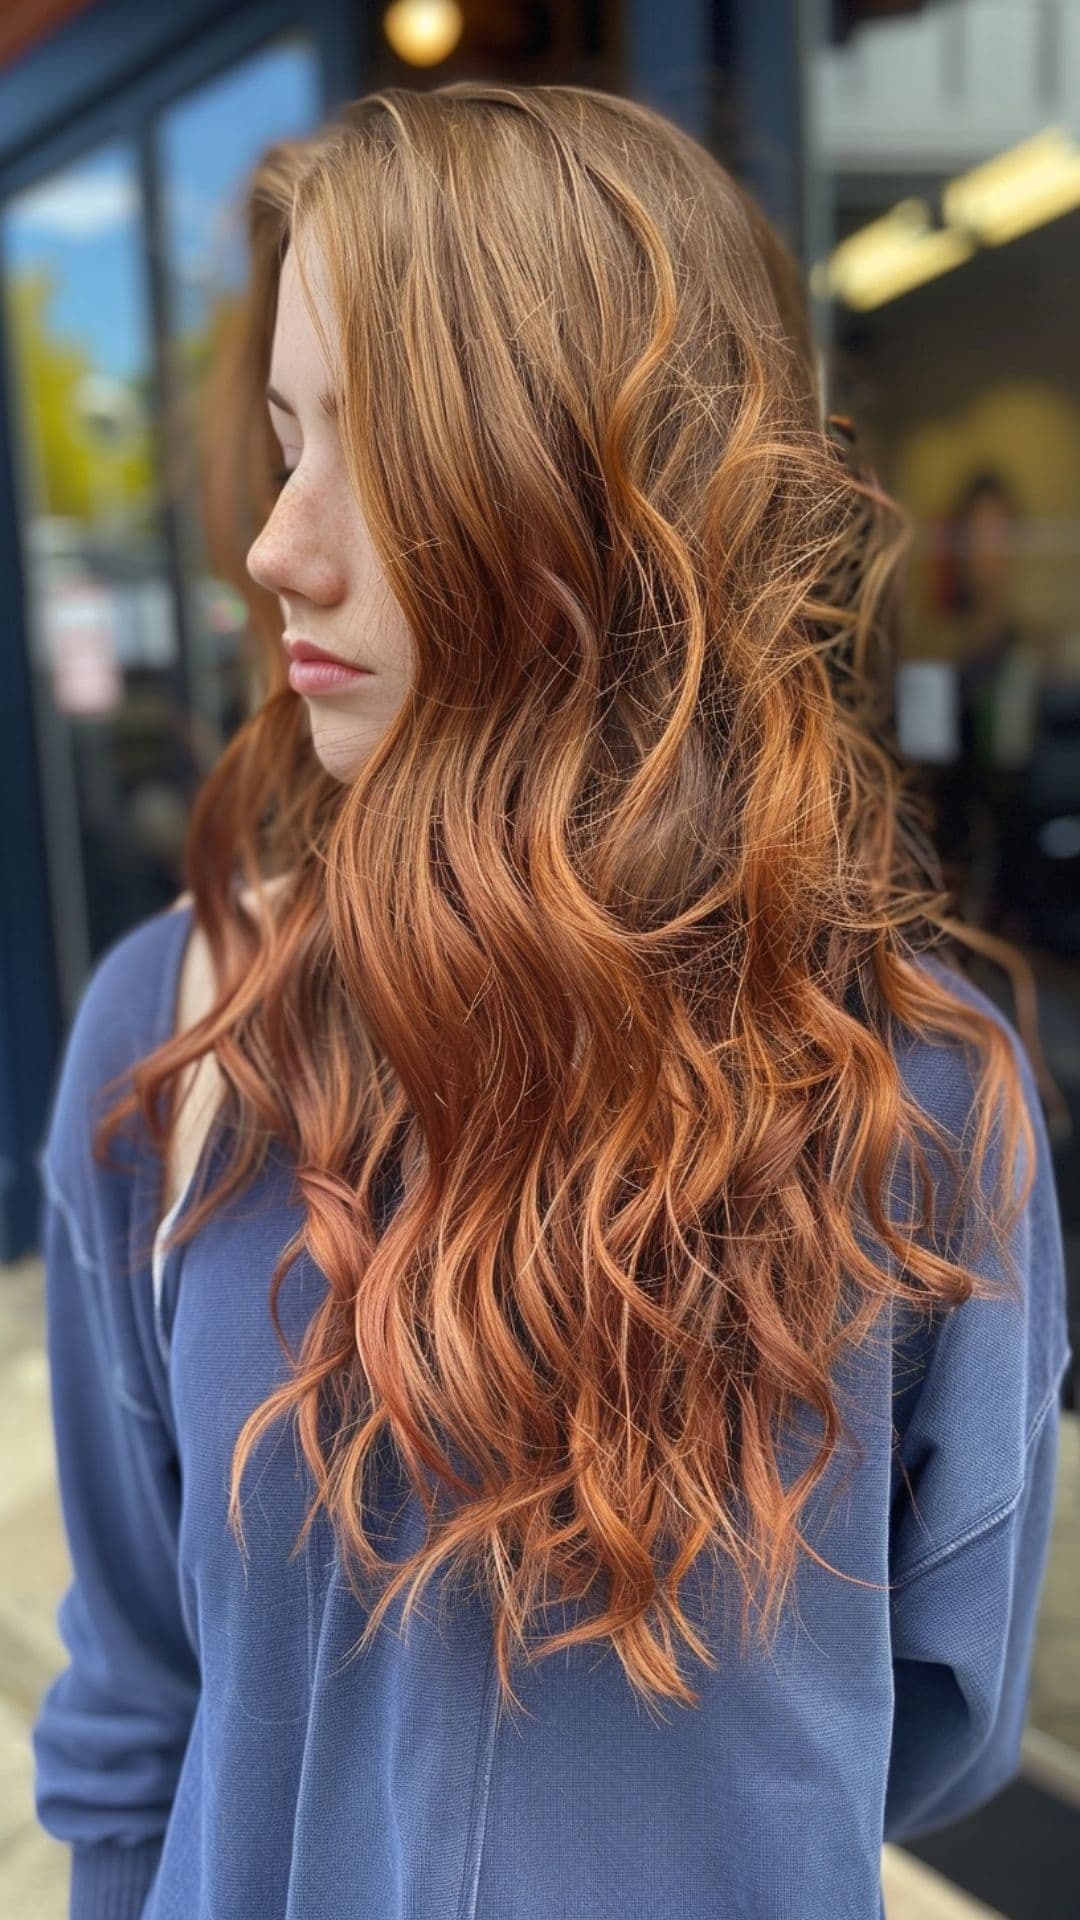 A woman modelling a reddish brown ombre hair.